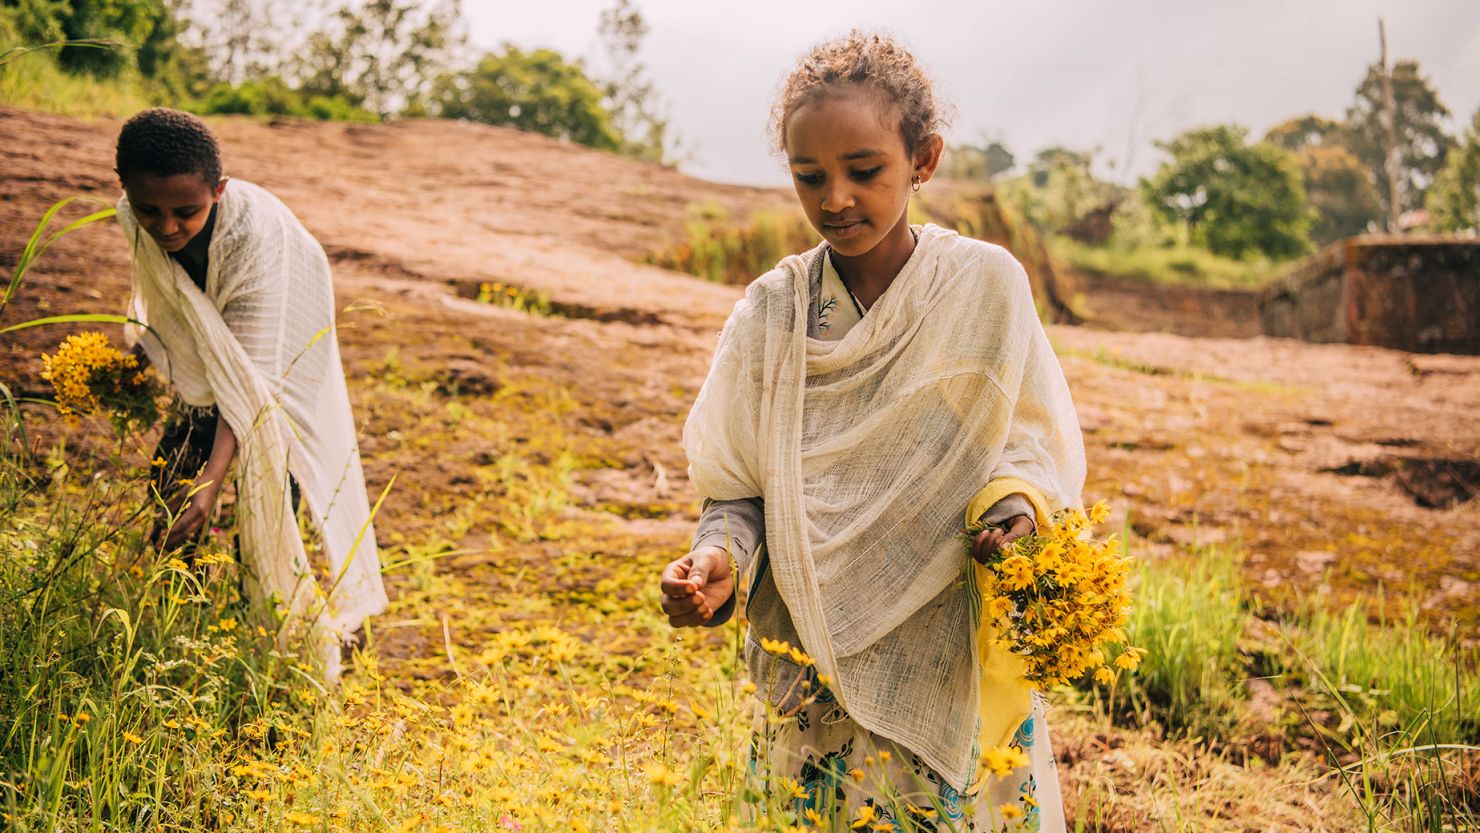 In Ethiopia, the birth year of Jesus Christ is recognized as seven or eight years later than the Gregorian, or “Western” calendar. New Year, or Enkutatash, is celebrated in September, when the Adey Abeba flower, indigenous to Ethiopia, blooms.